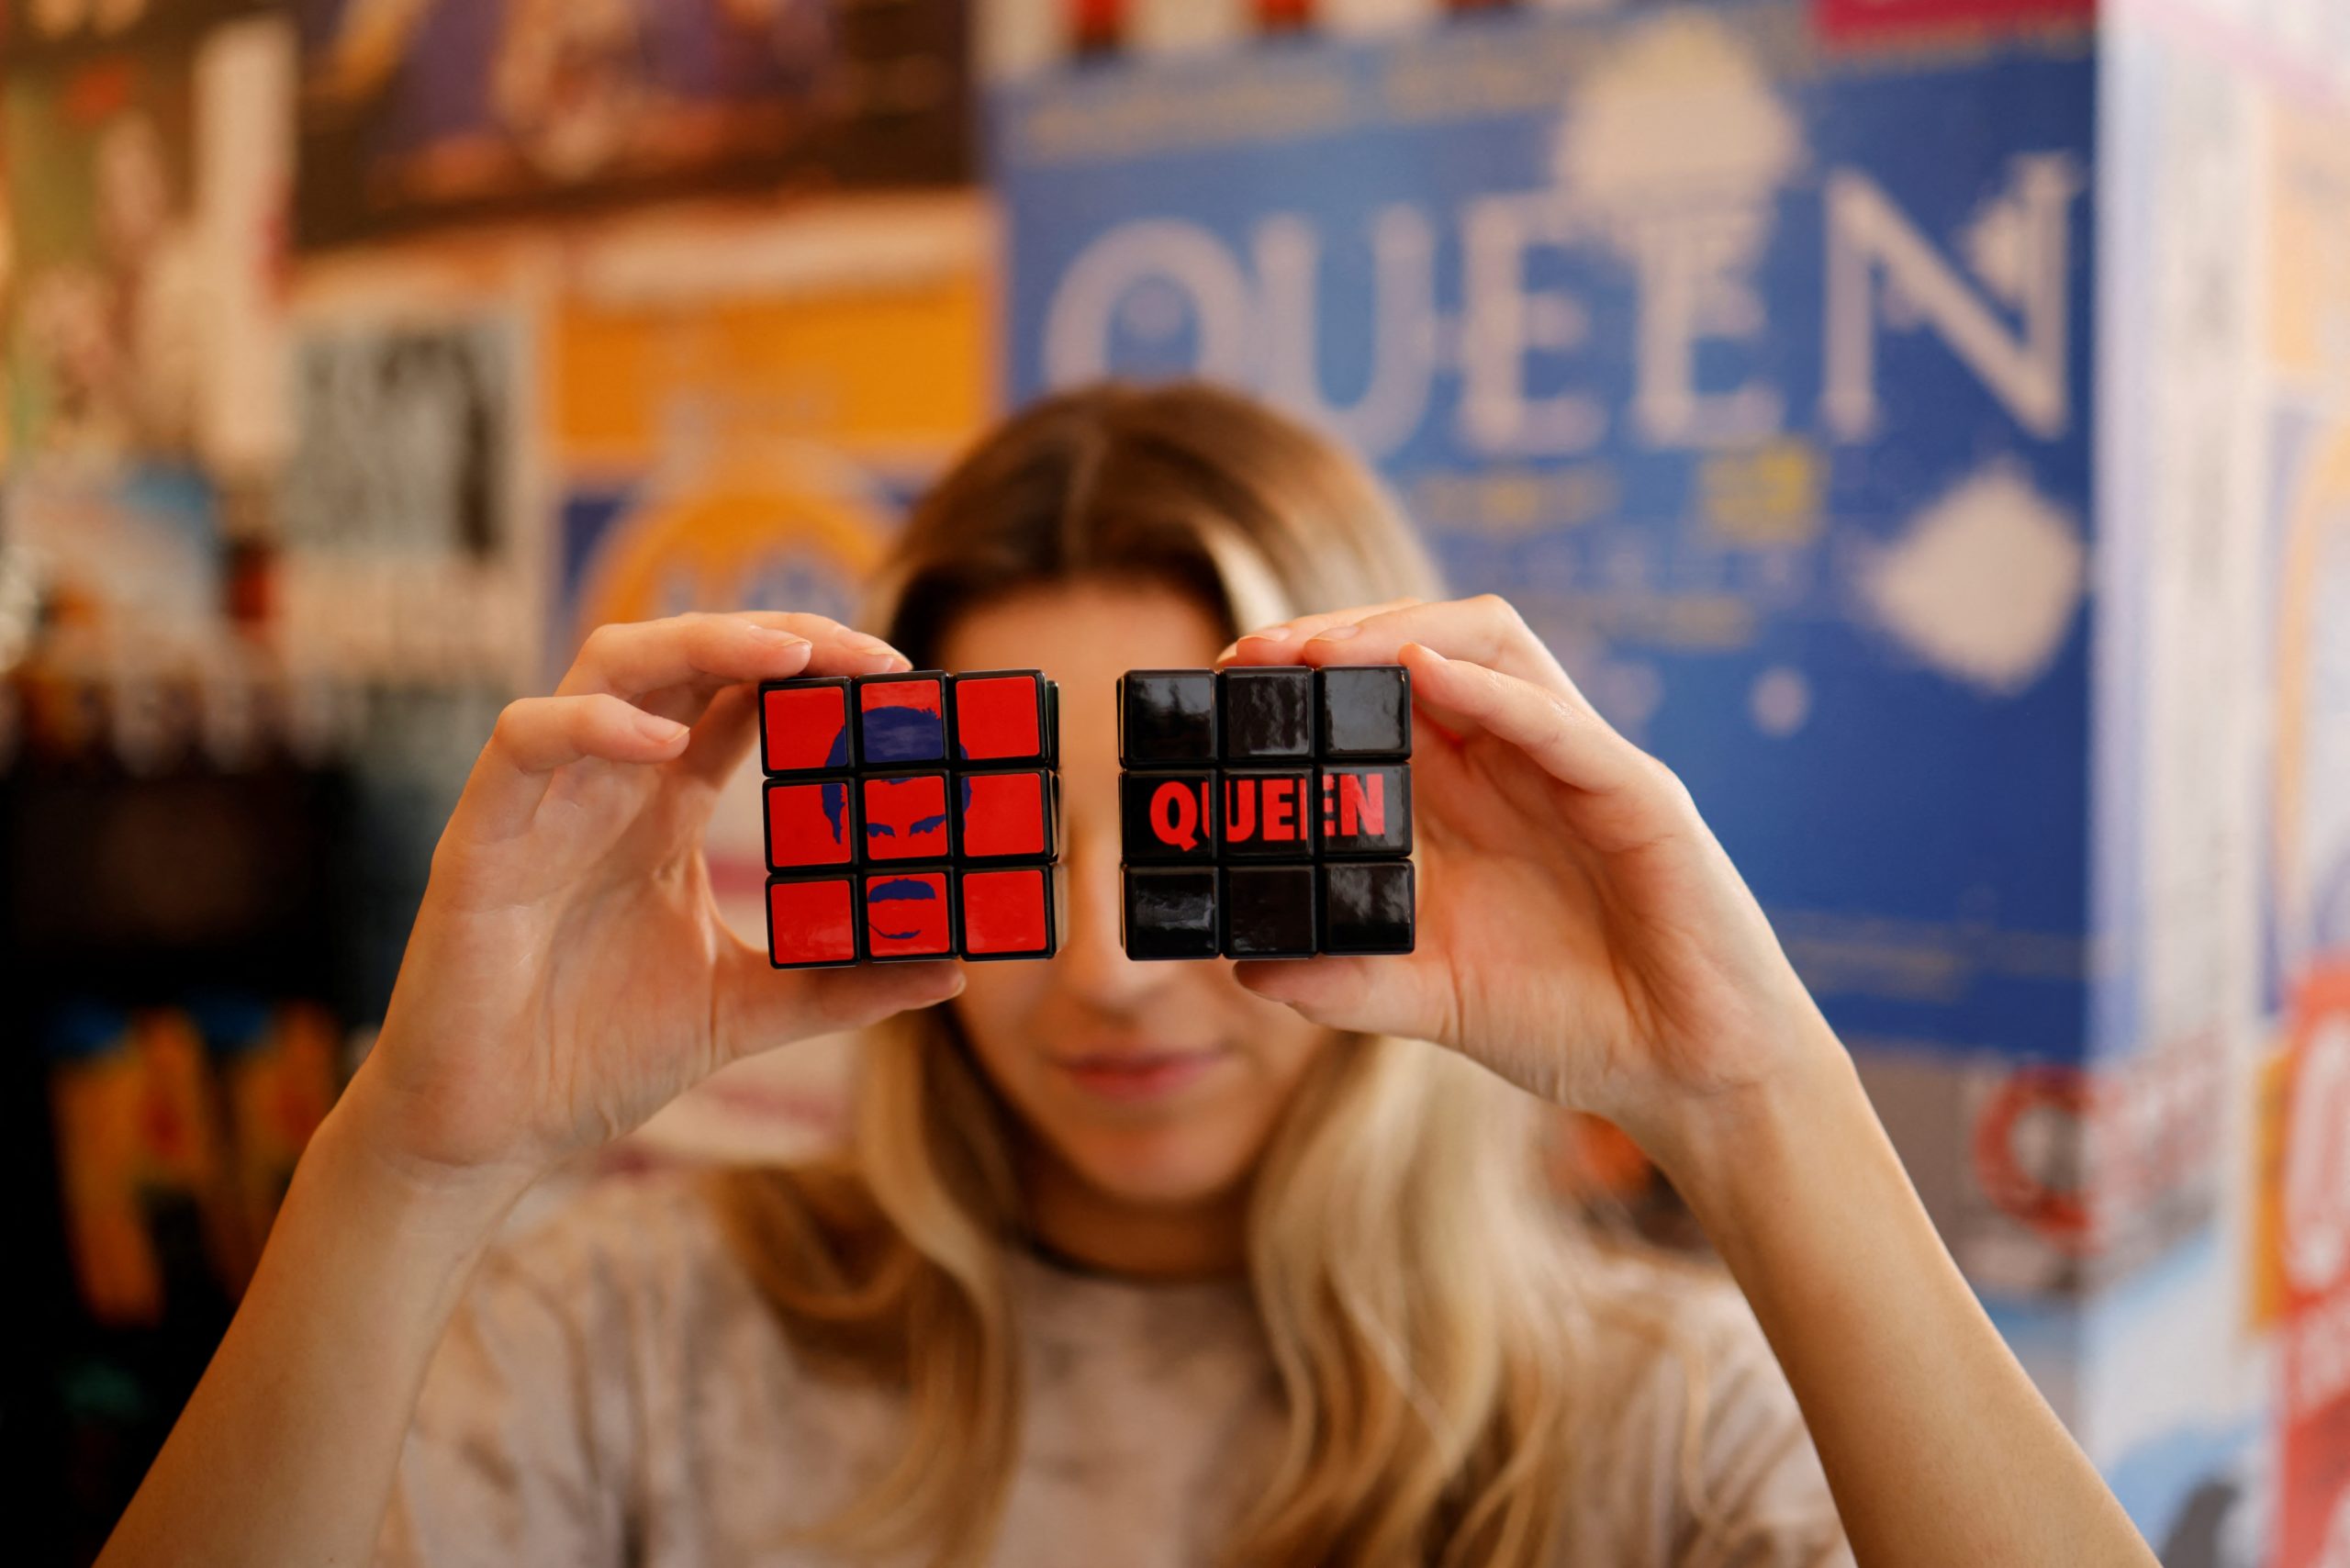 A shop assistant poses with official merchandise of legendary British rock group Queen on sale at their newly opened store in central London on September 27, 2021. (Photo by Tolga Akmen / AFP)